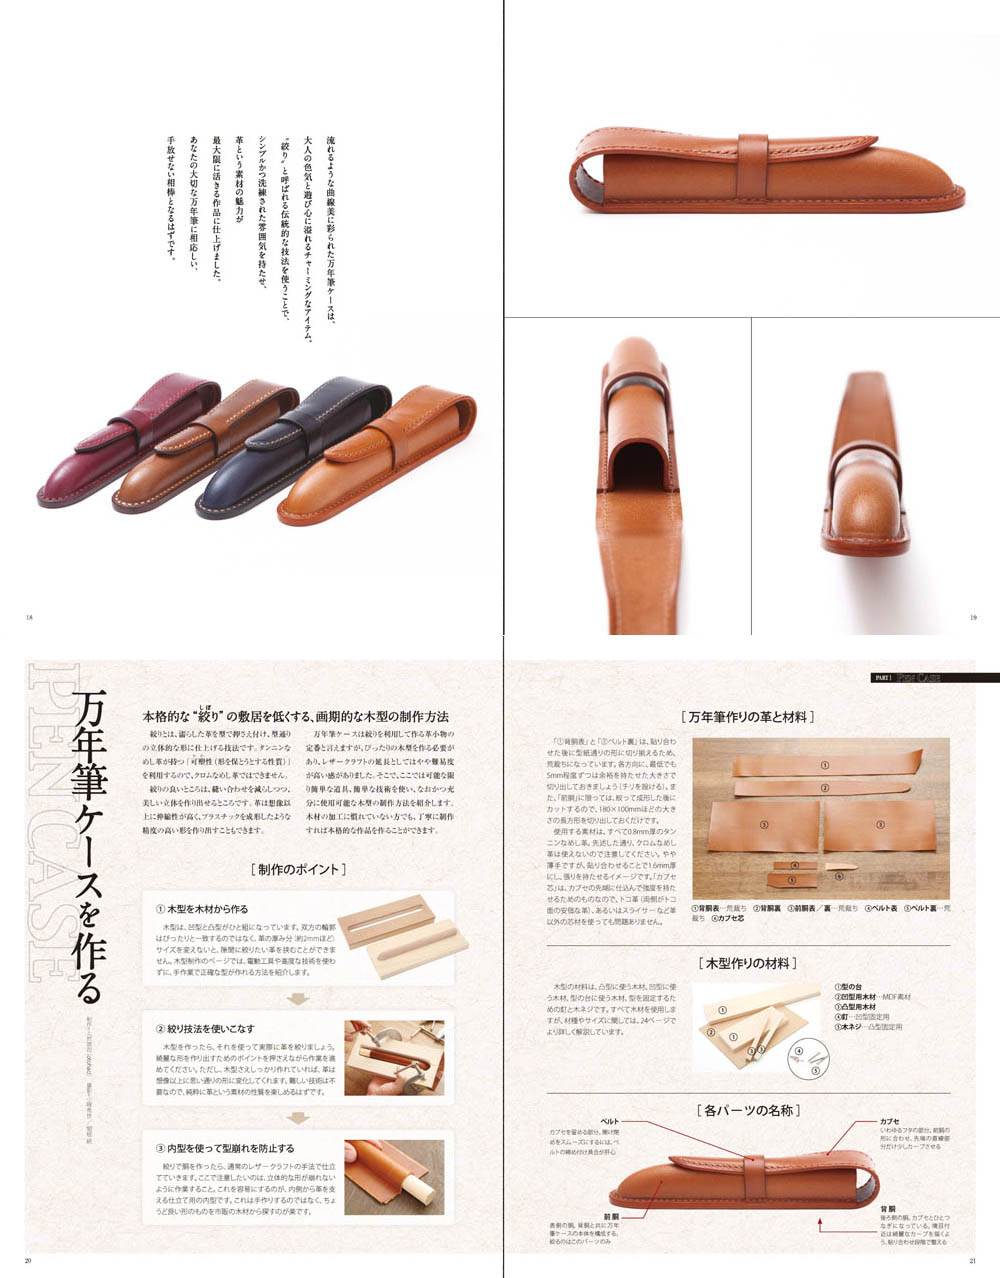 Adult leather craft 2 (Professional Series) 